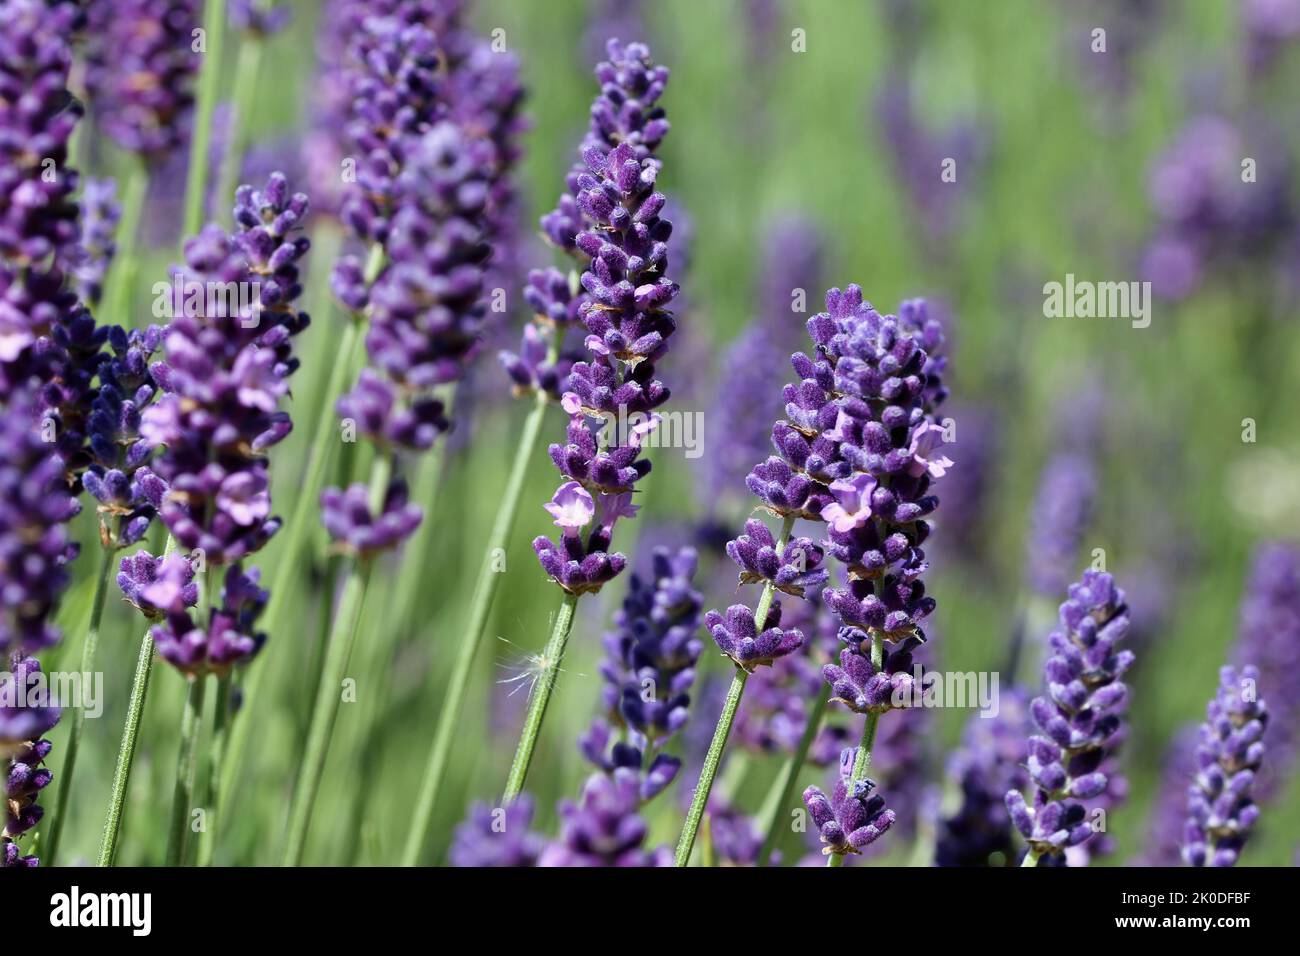 Purple lavender, Lavandula species, flowers in close up with a blurred background of leaves and other flowers. Stock Photo